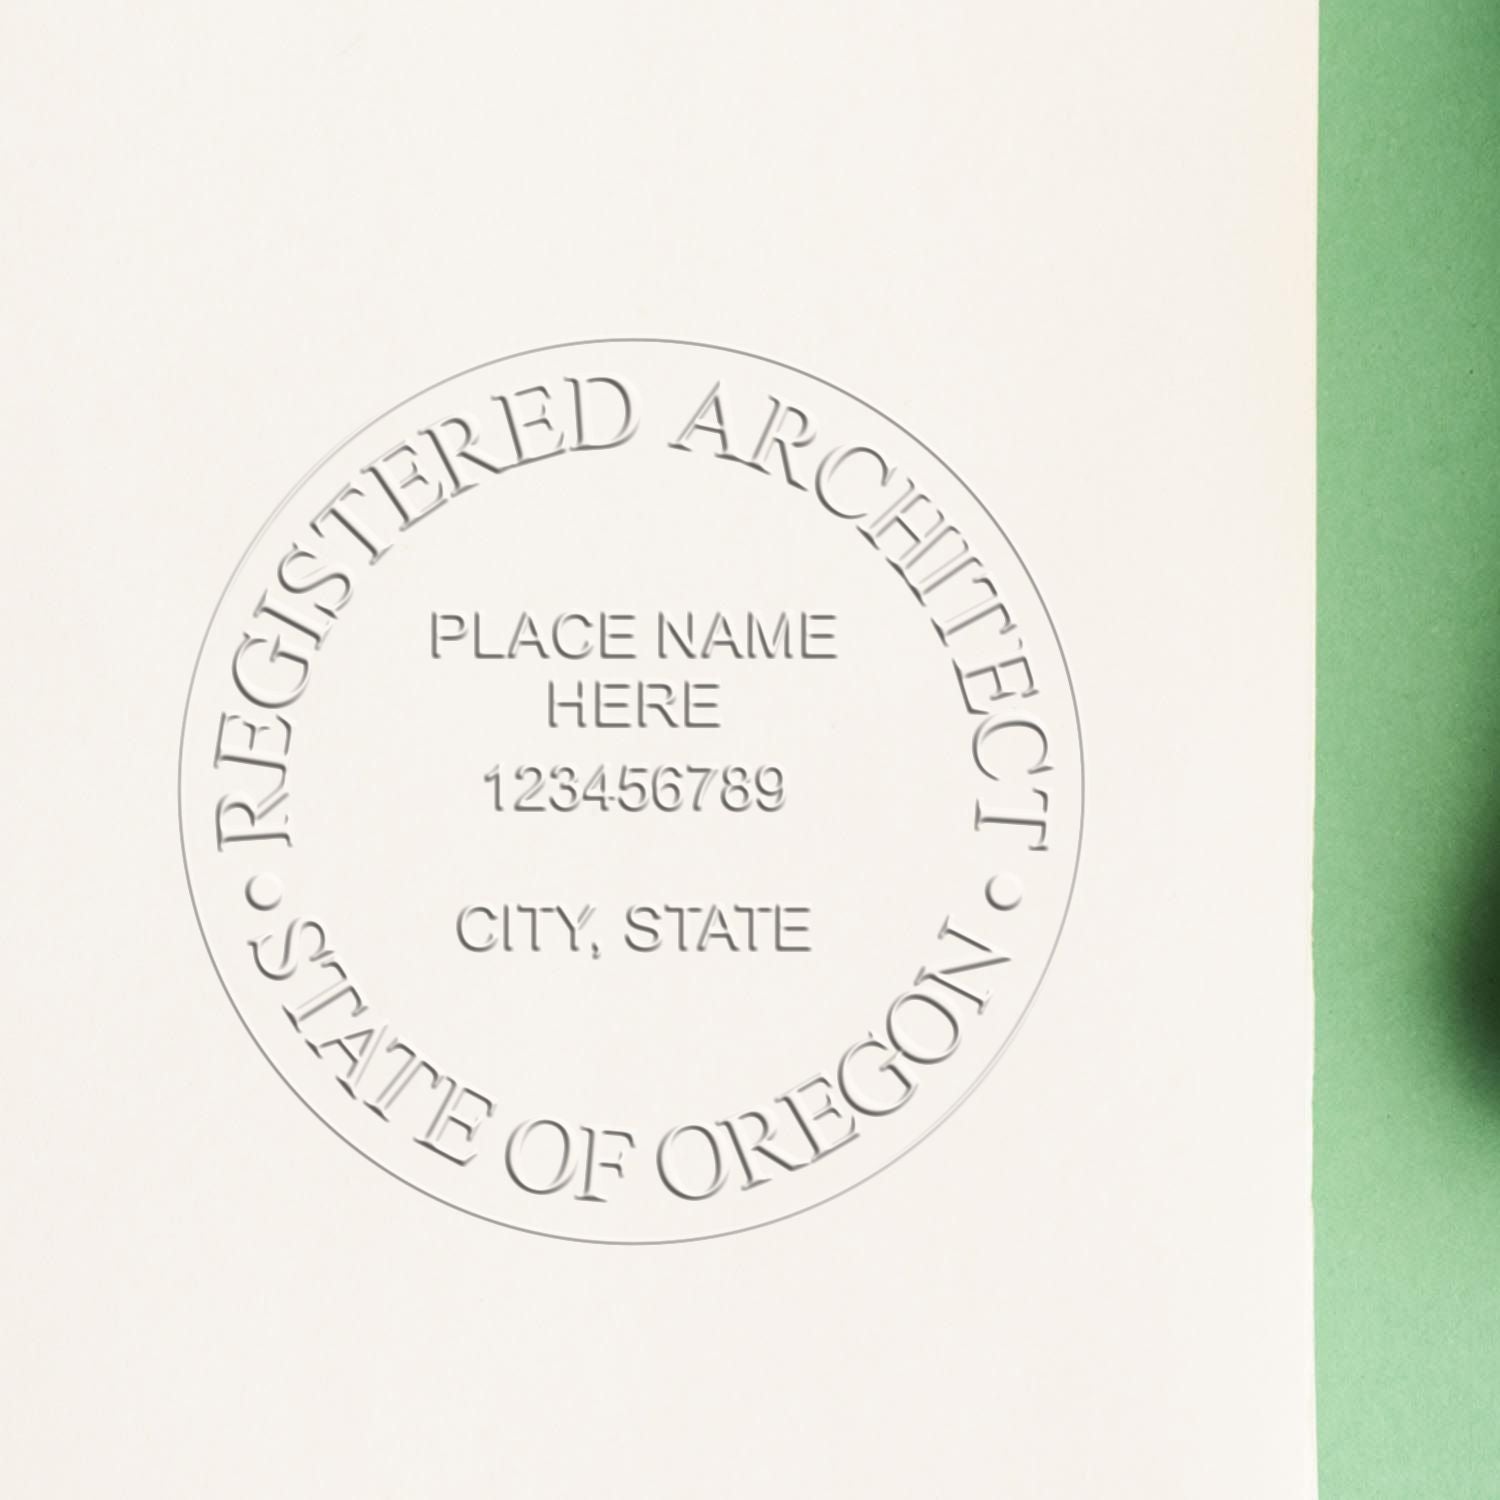 A lifestyle photo showing a stamped image of the Oregon Desk Architect Embossing Seal on a piece of paper